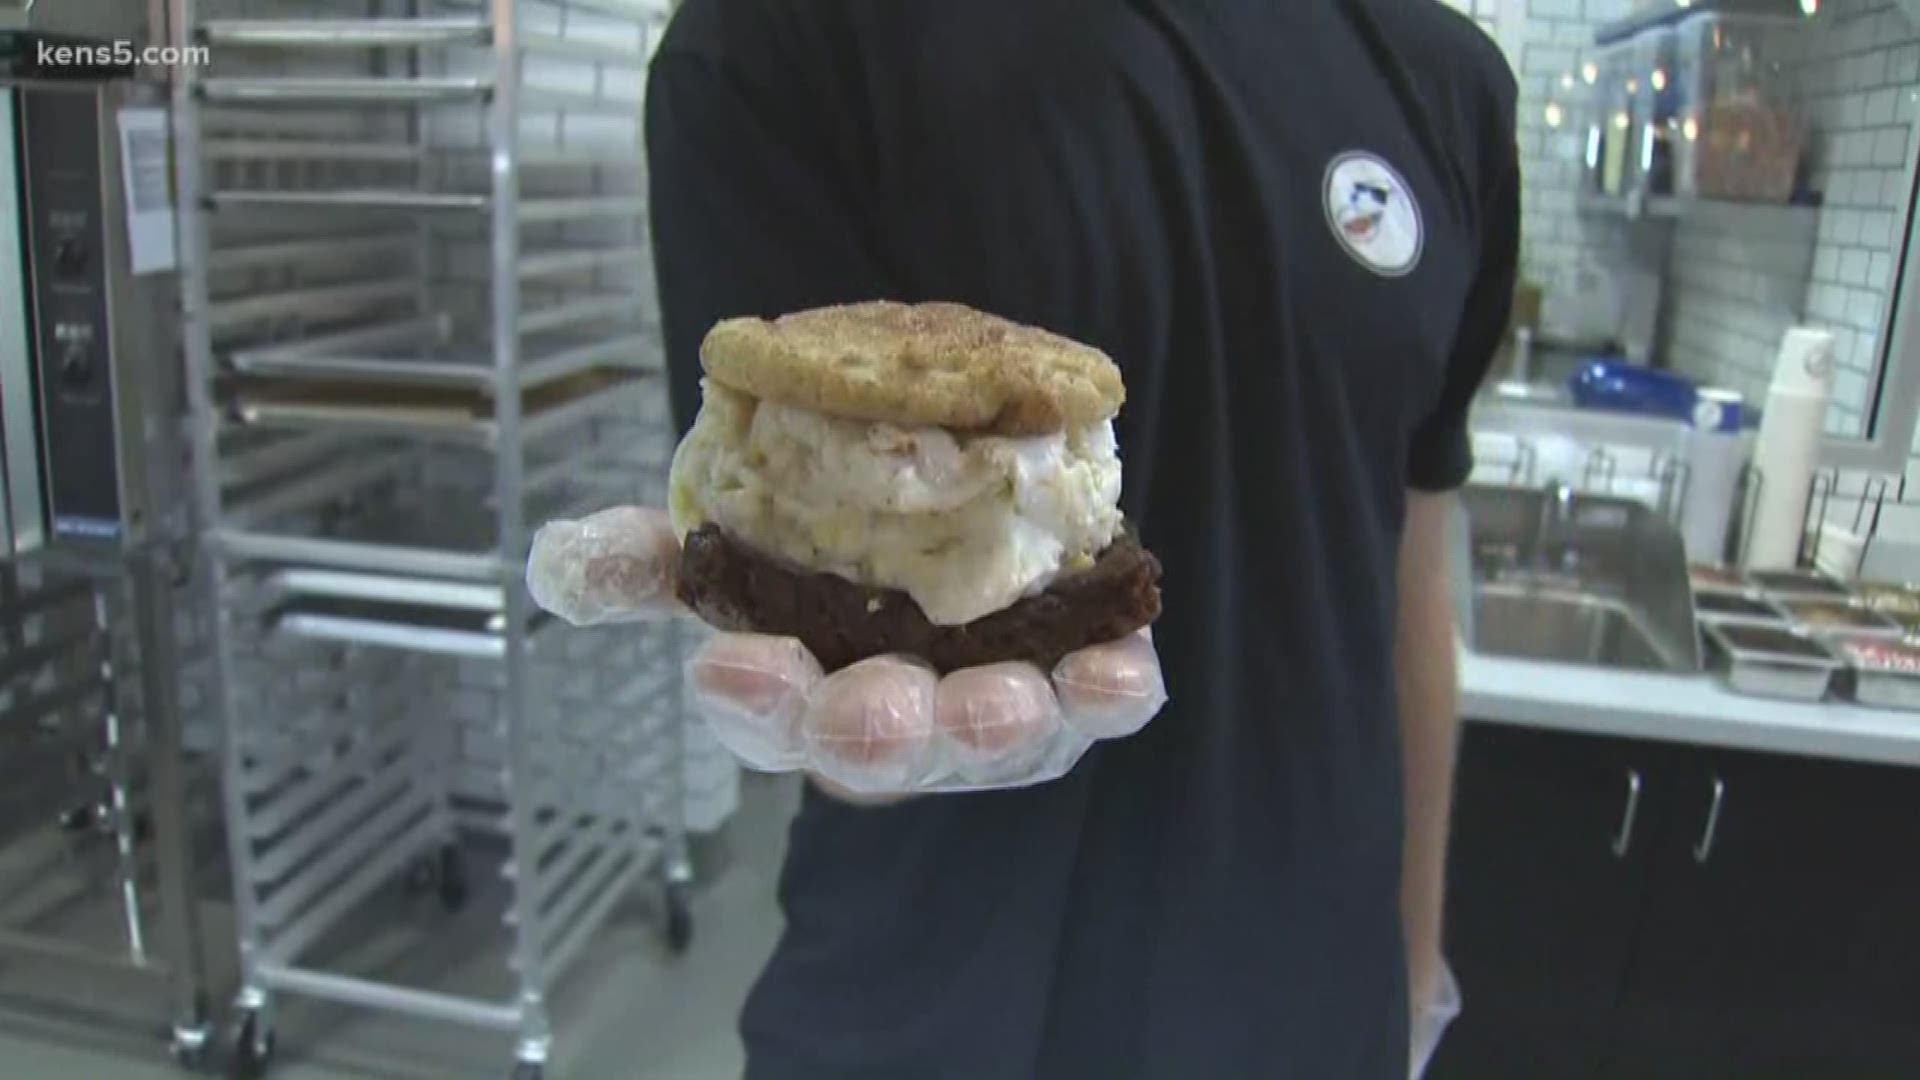 KENS 5's Audrey Castoreno tries out the unique delights at the Baked Bear at La Cantera, which offers baked cookie ice cream sandwiches.